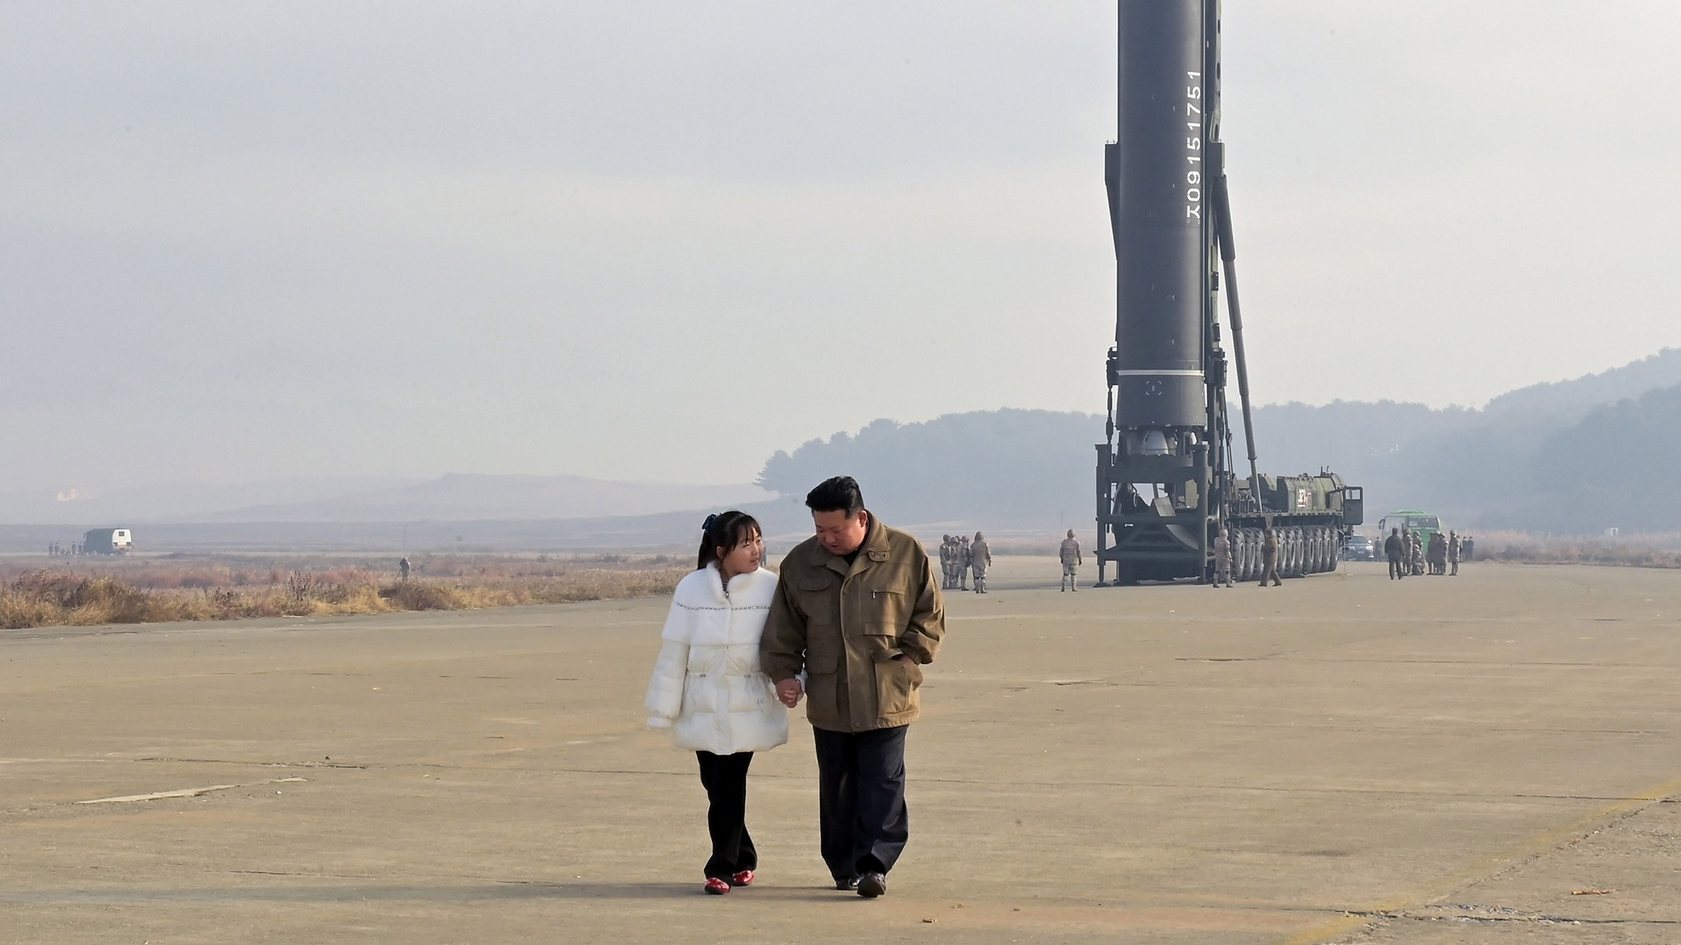 epa10313519 A photo released by the official North Korean Central News Agency (KCNA) shows North Korean leader Kim Jong-Un, accompanied by his daughter during the test firing of a new type of intercontinental ballistic missile (ICBM) Hwasongpho-17 at Pyongyang International airport in Pyongyang, North Korea, 18 November 2022 (Issued on 19 November 2022). According to KCNA, the missile traveled up to a maximum altitude of 6,040.9 kilometres and flew a distance of 999.2 kilometres for 4,135s before landing in open waters of the East Sea.

Thank you  EPA/KCNA   EDITORIAL USE ONLY